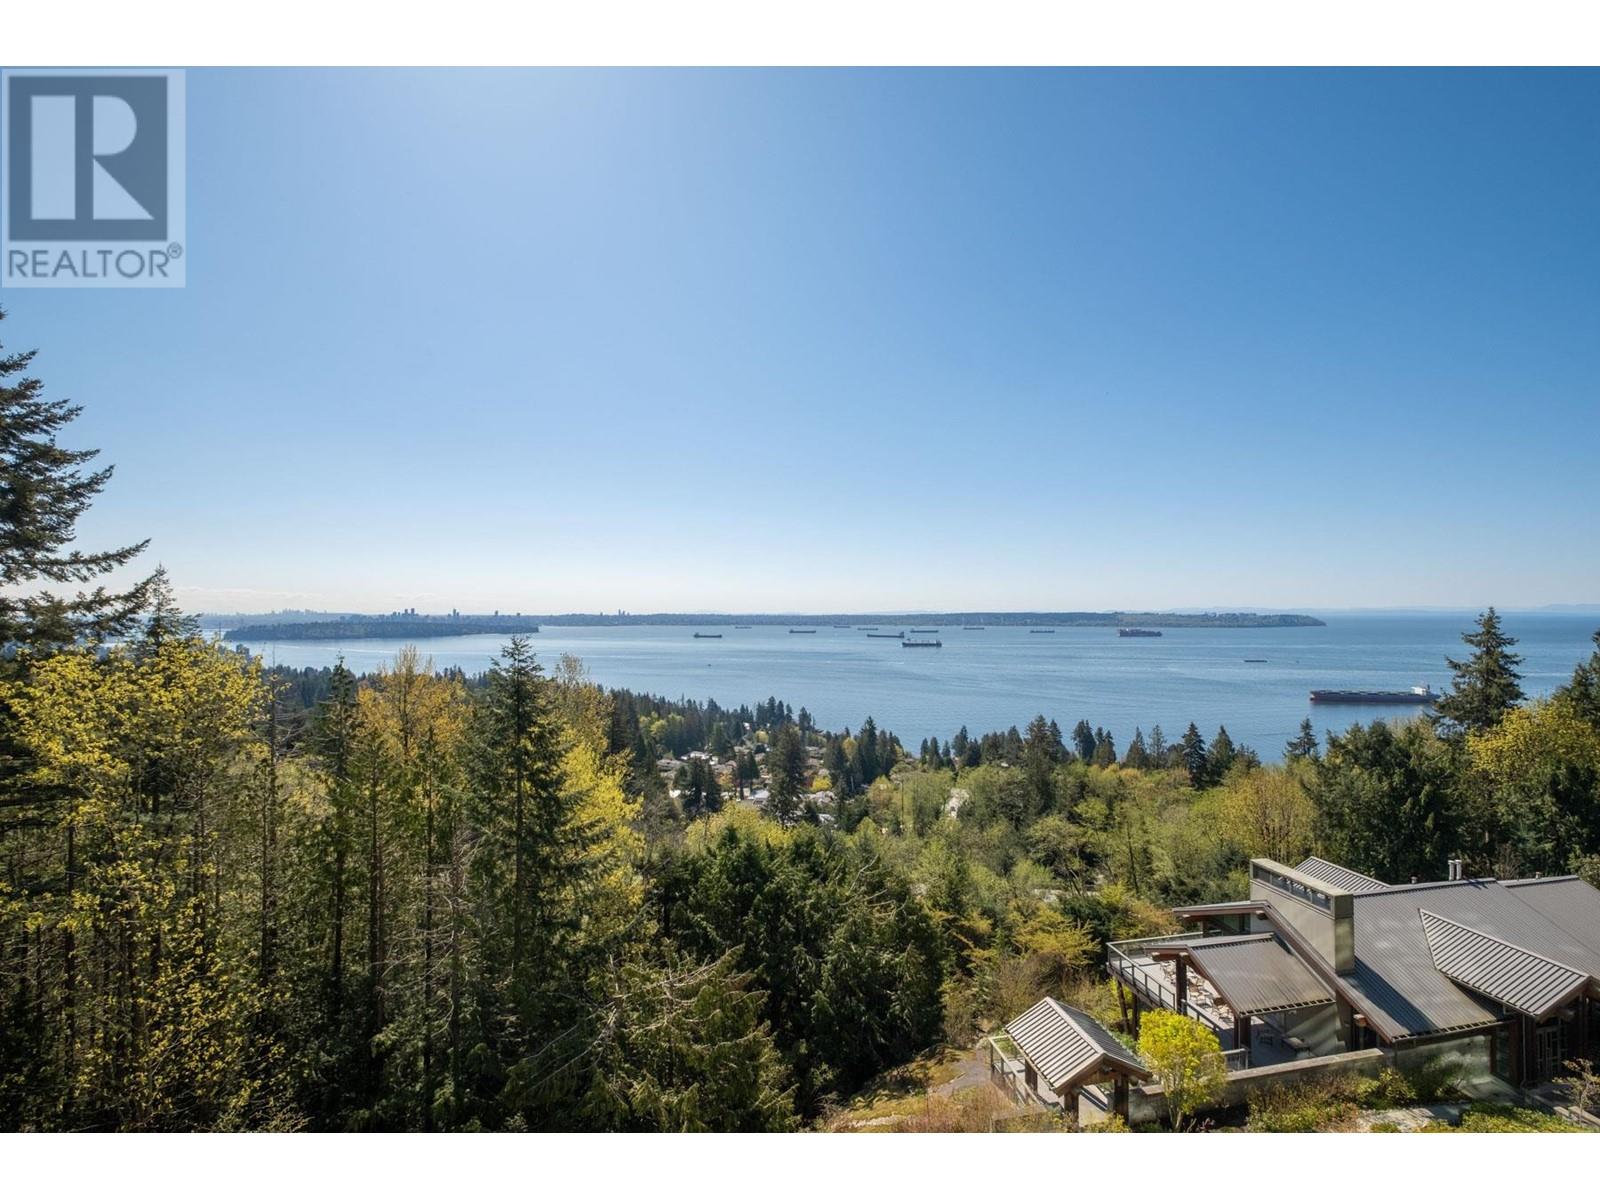 801 3315 CYPRESS PLACE, west vancouver, British Columbia